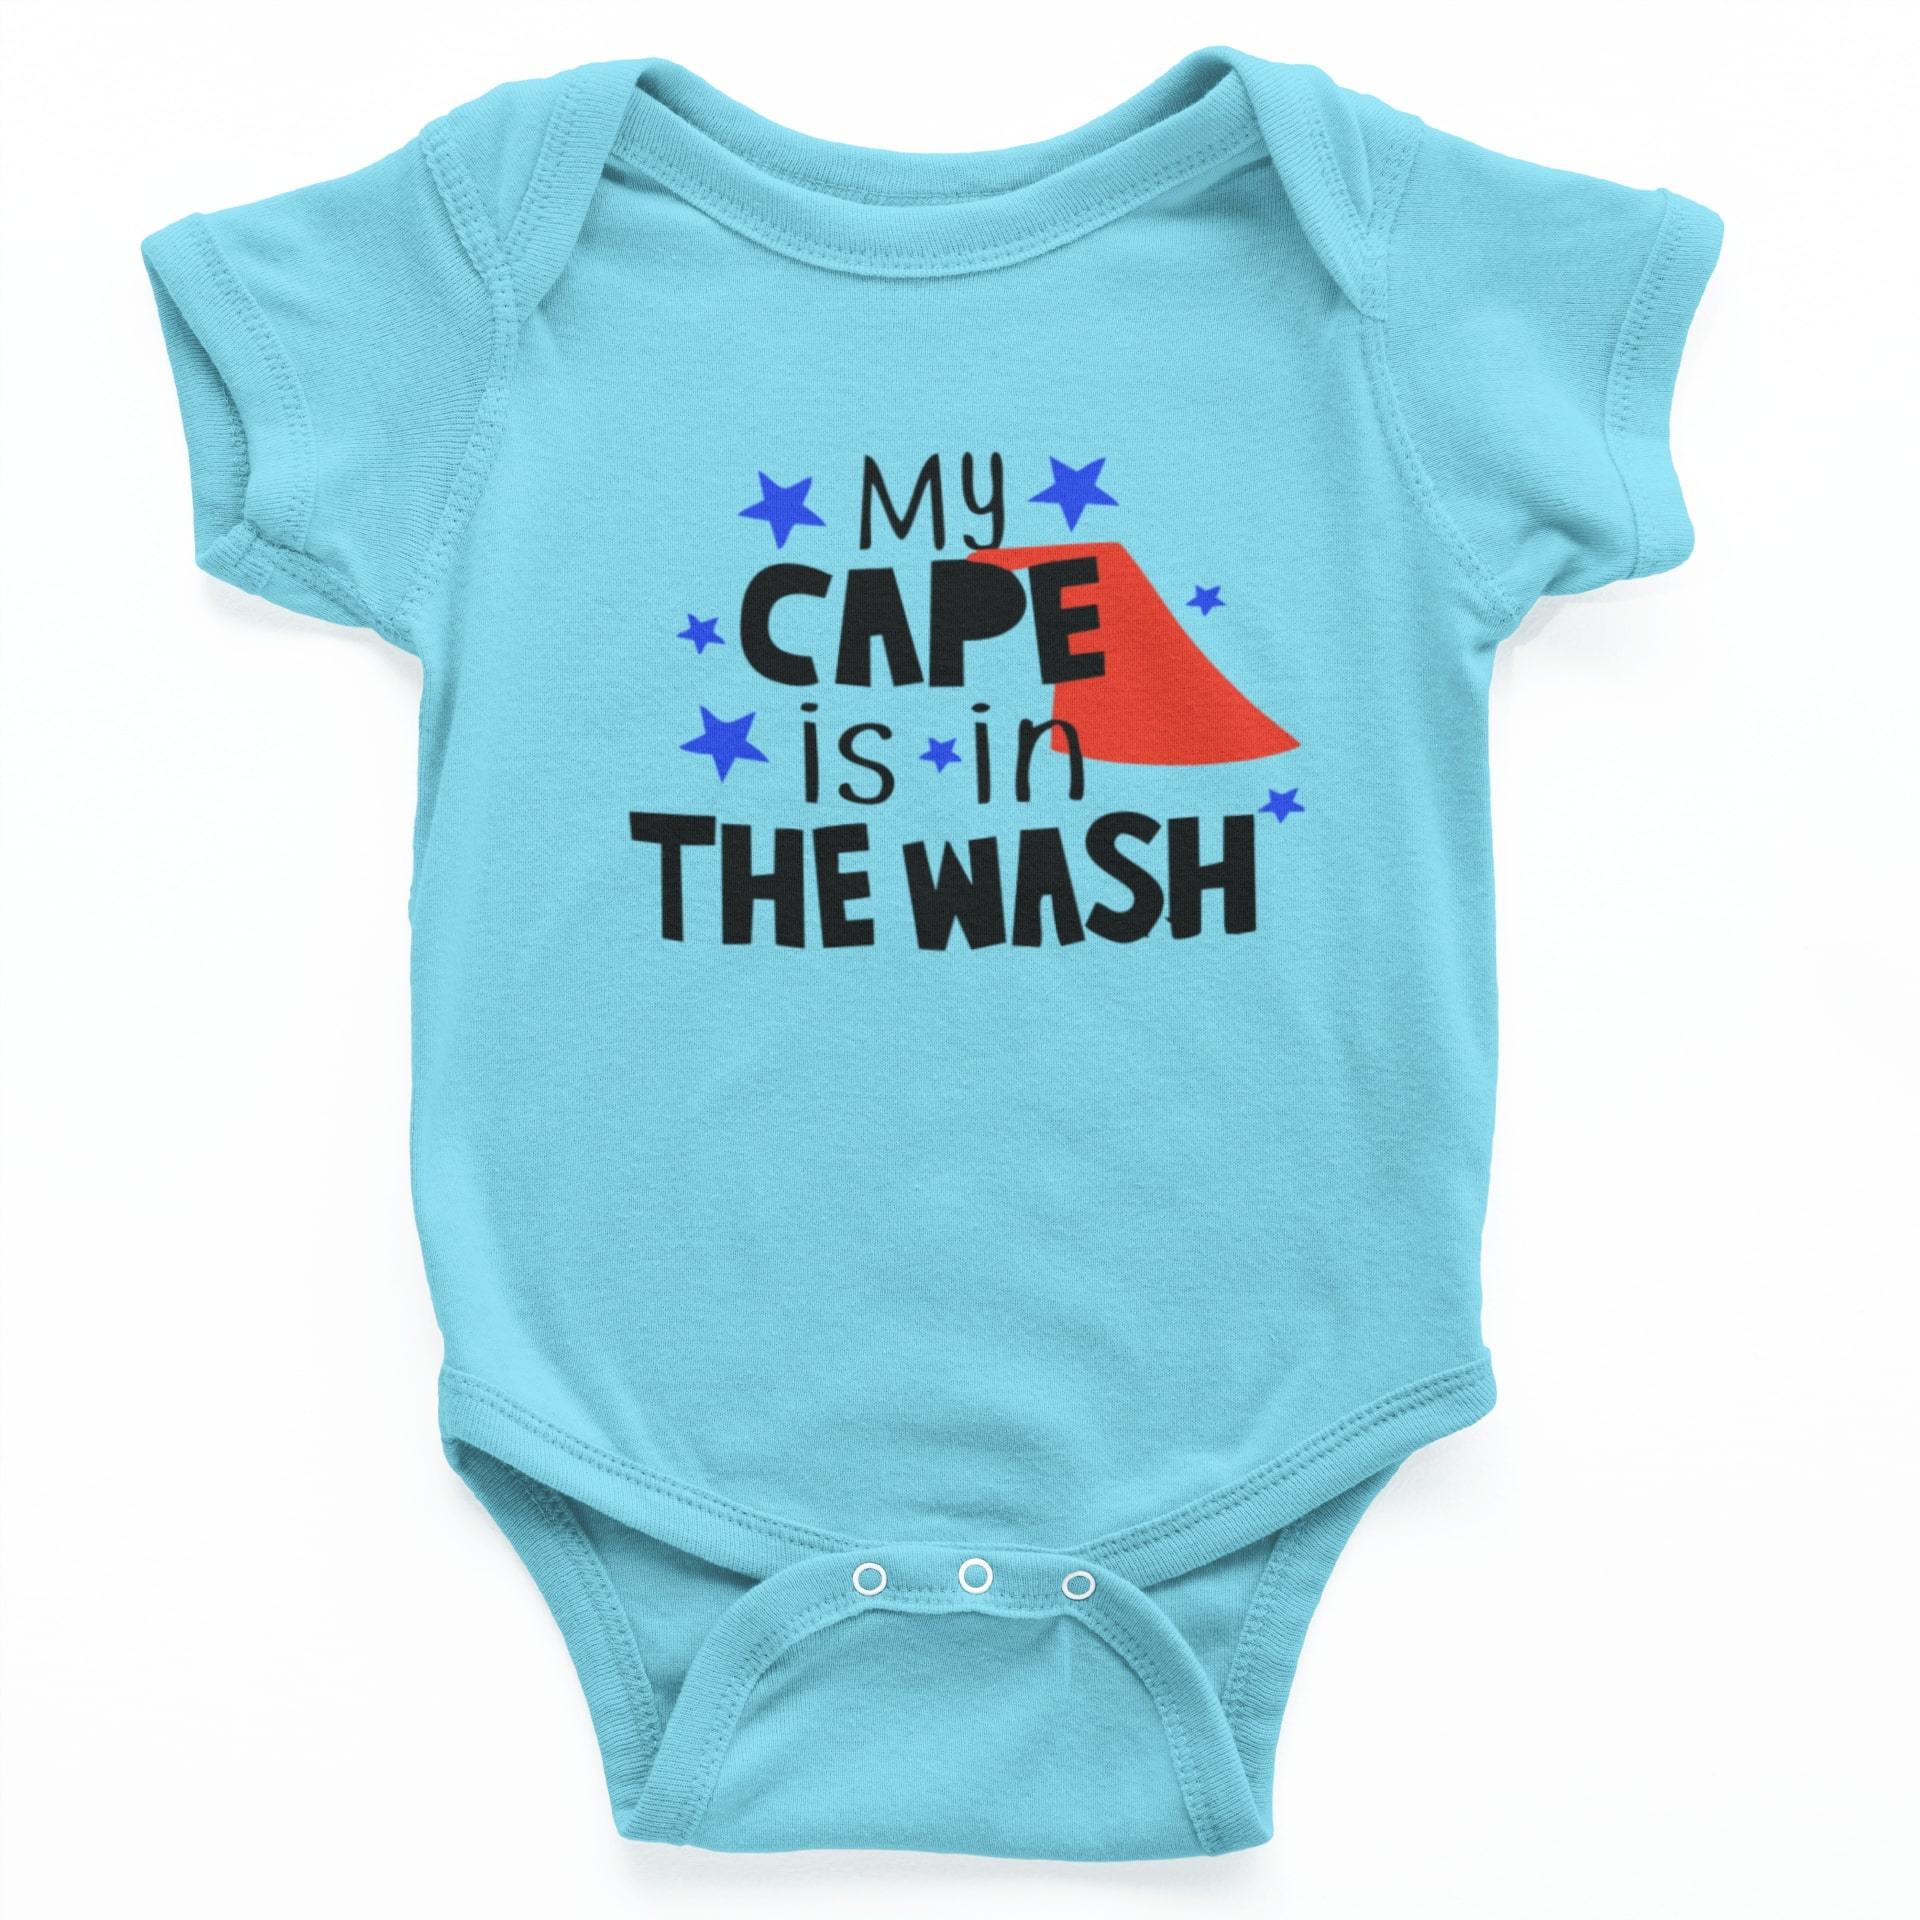 thelegalgang,My Cape is in the wash Rompers for Babies,.